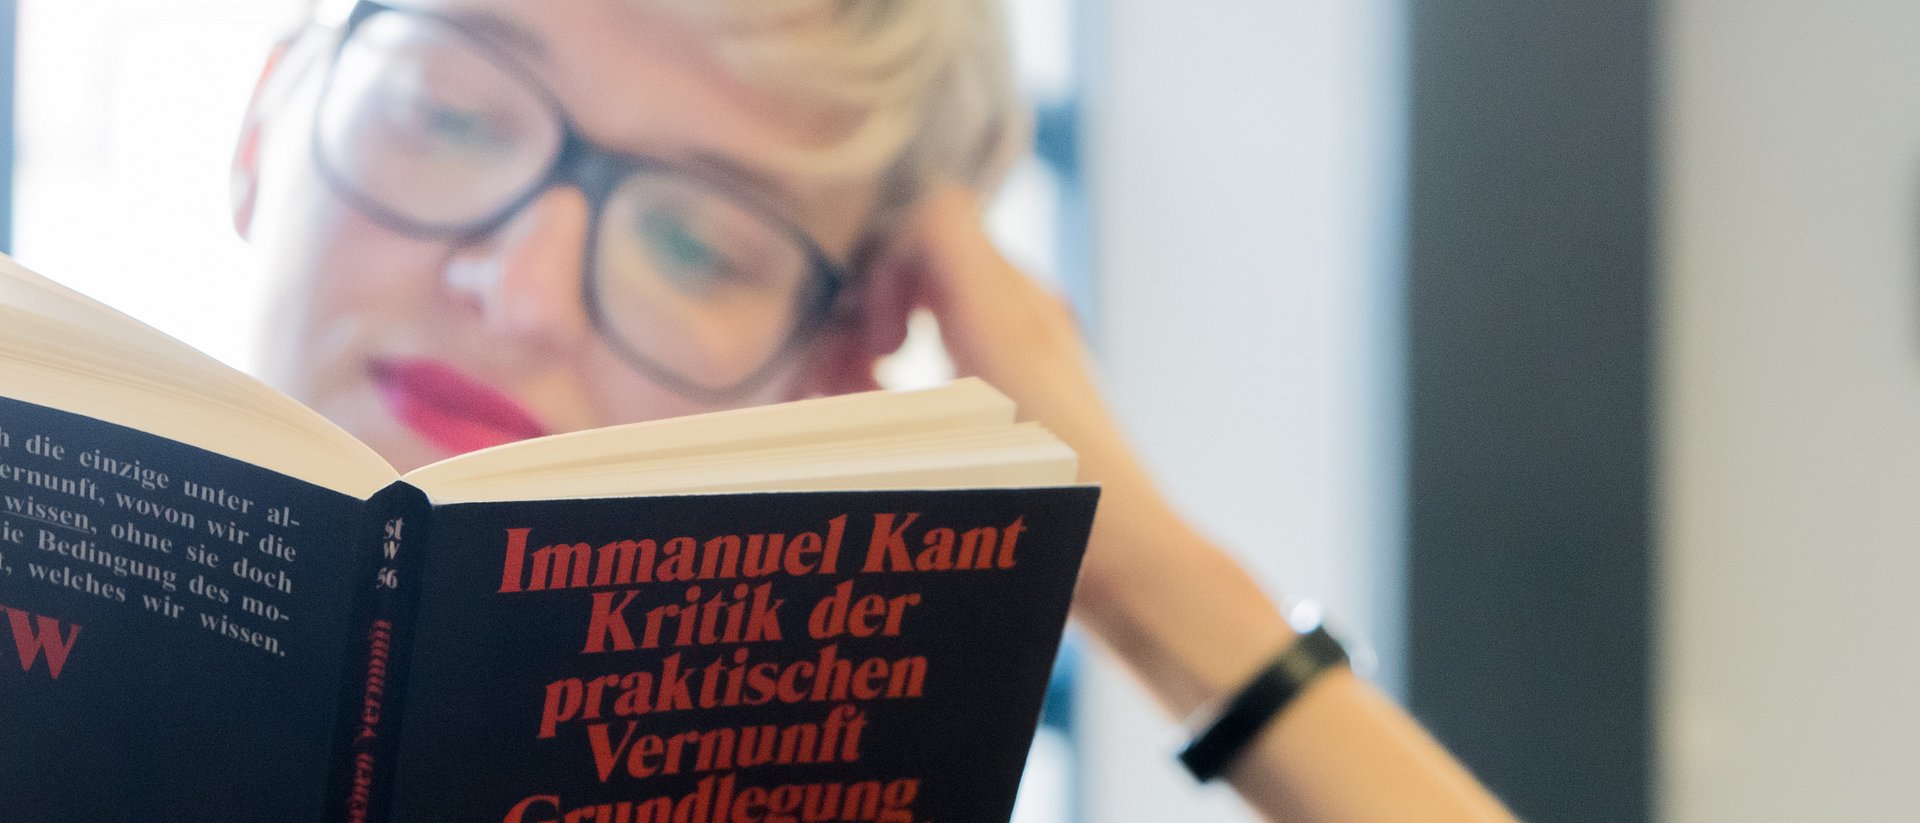 Student reading a book of Immanuel Kant